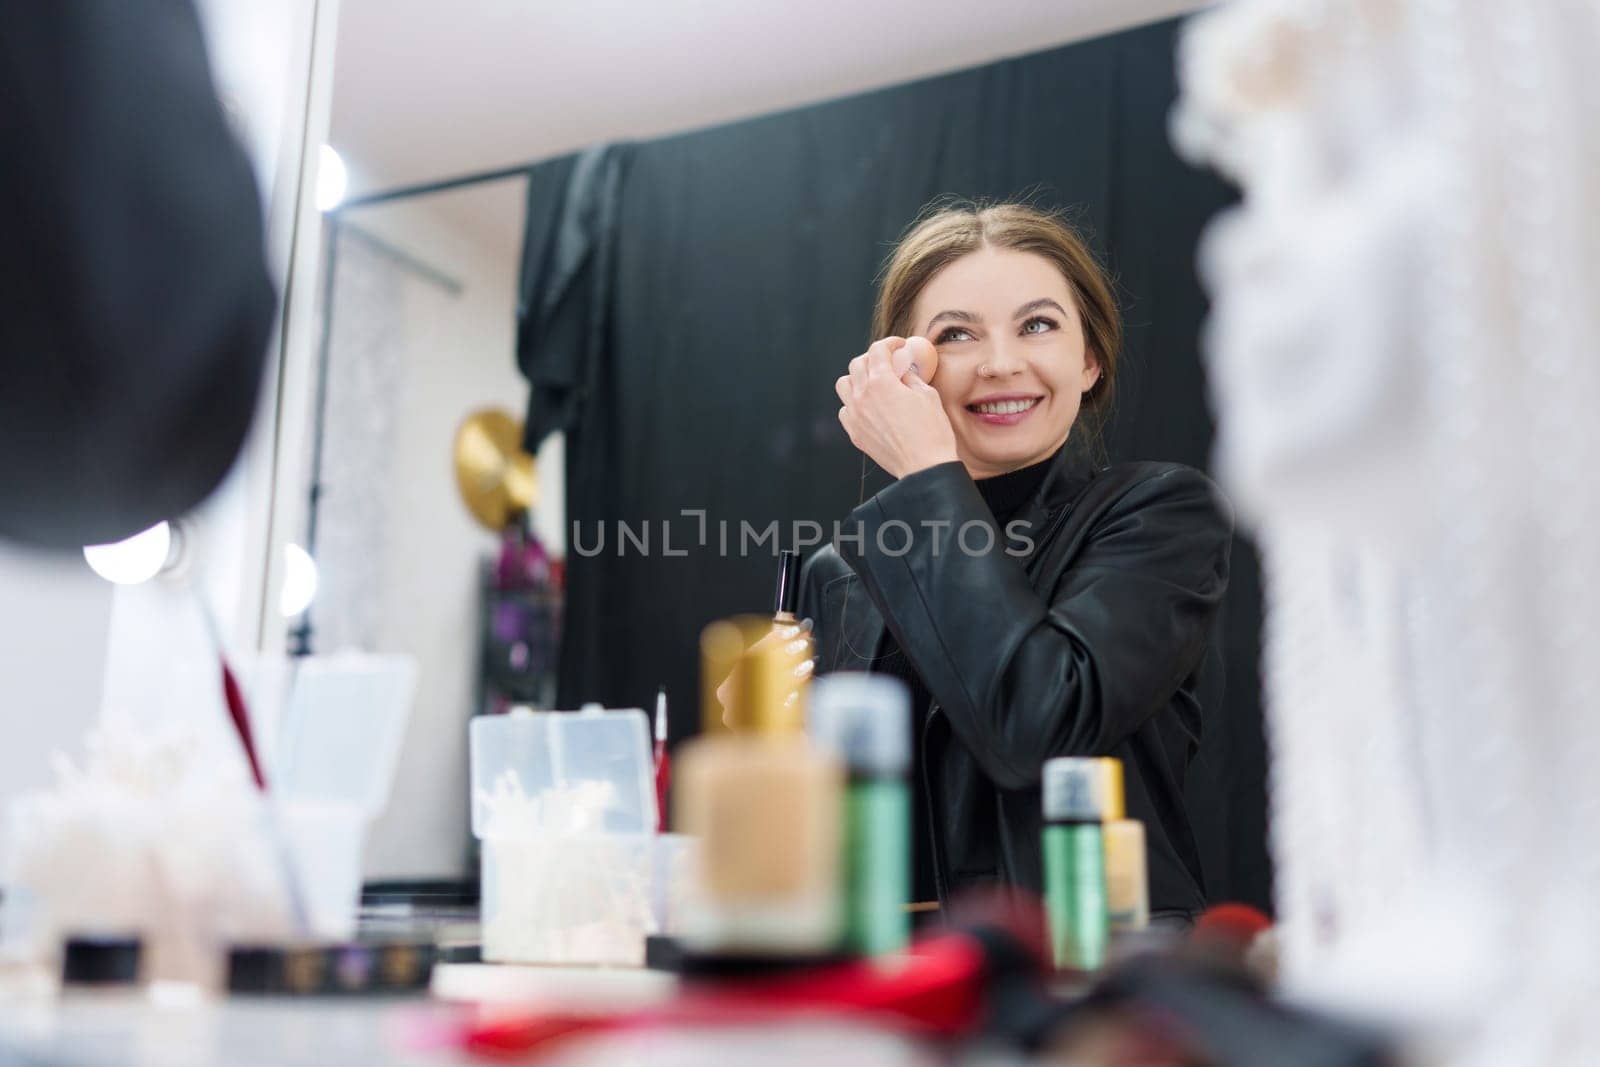 Reflection on the mirror of a woman applying powder while making up in a backstage